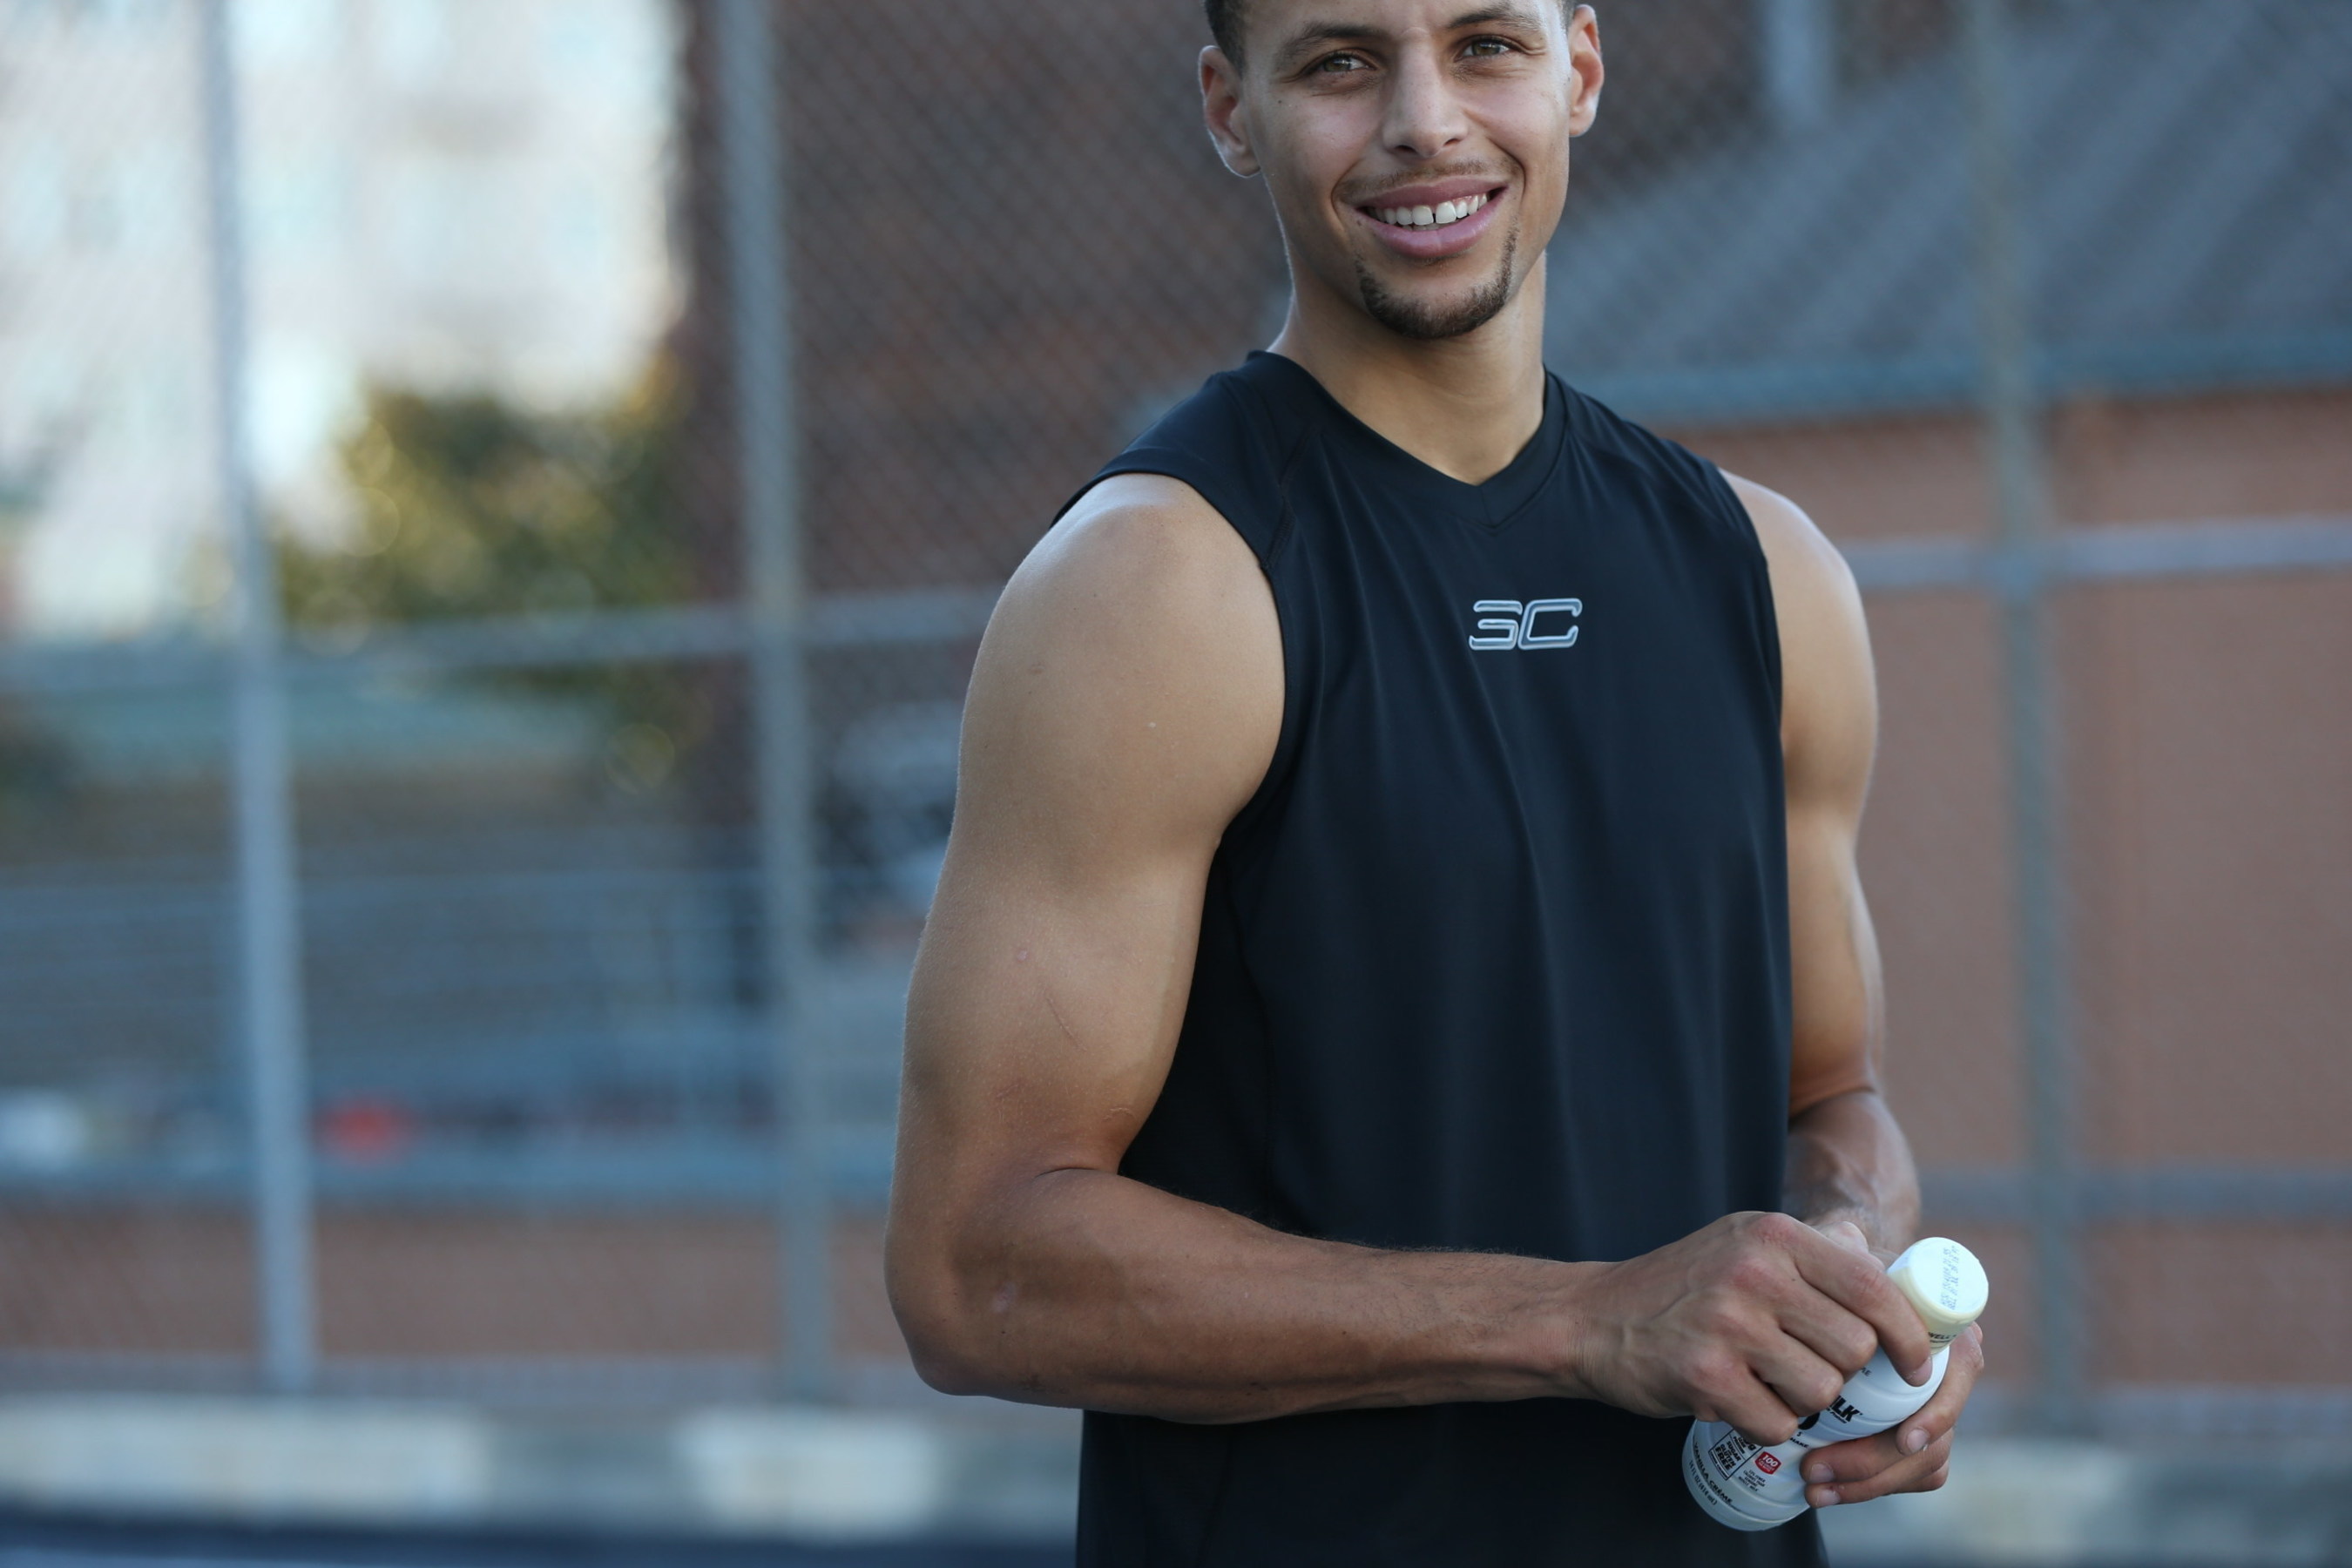 The Muscle Milk brand has renewed its partnership with MVP Stephen Curry through 2018. In the next year, Curry will be featured in the brand's national commercial campaign and will heavily support the Muscle Milk Recovery Grant program which provides grants to high school athletic programs in need around the country. "My partnership with the Muscle Milk(R) team began in the early stages of my career, and they've supported me throughout this amazing journey," said Curry. "Their team has become a part of my family on and off the court."